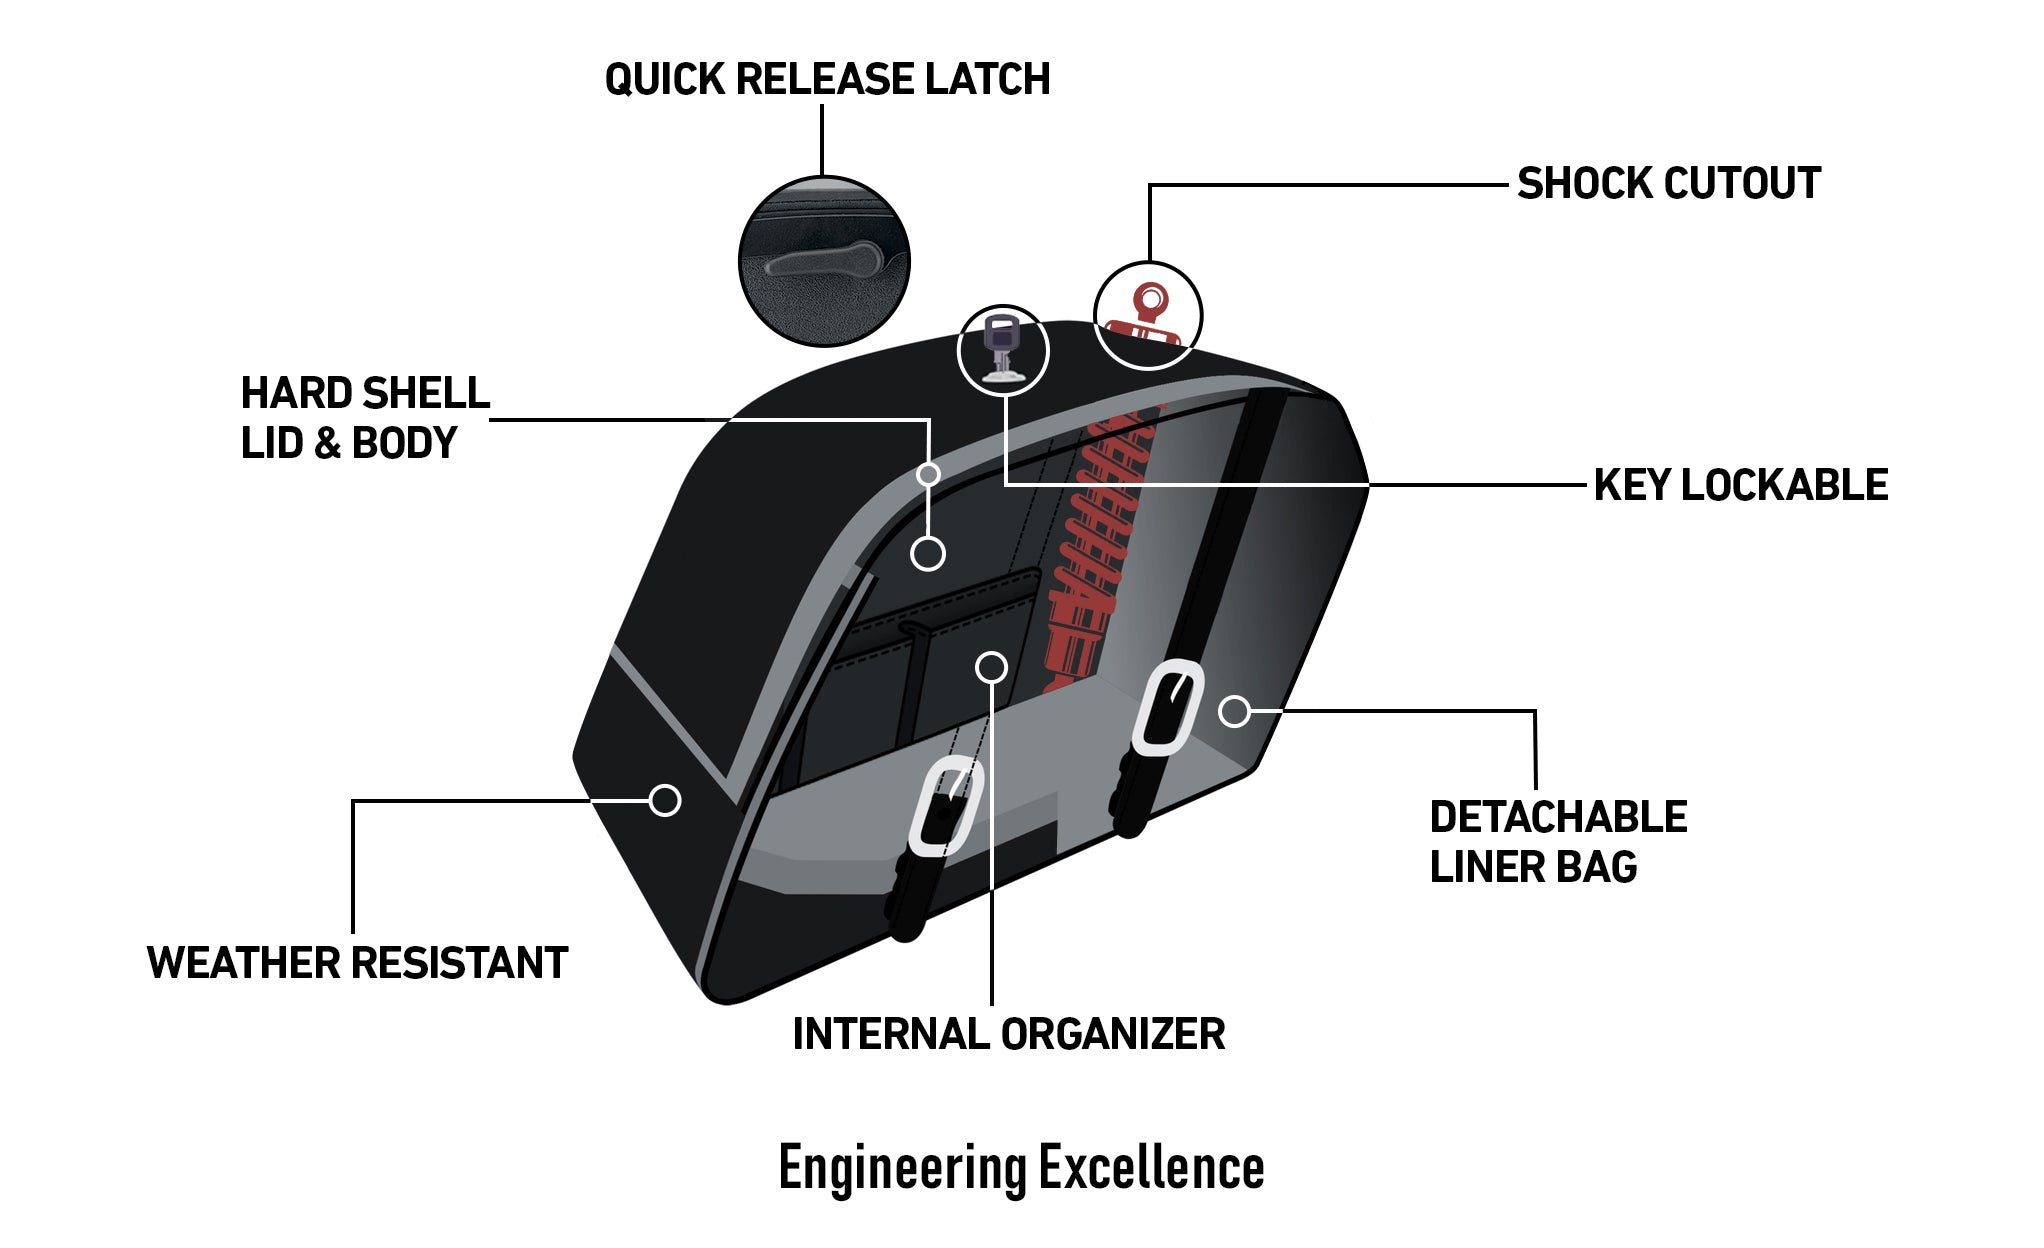 Viking Baldur Extra Large Shock Cut Out Painted Motorcycle Hard Saddlebags For Harley Dyna Street Bob Fxdb I Engineering Excellence with Bag on Bike @expand